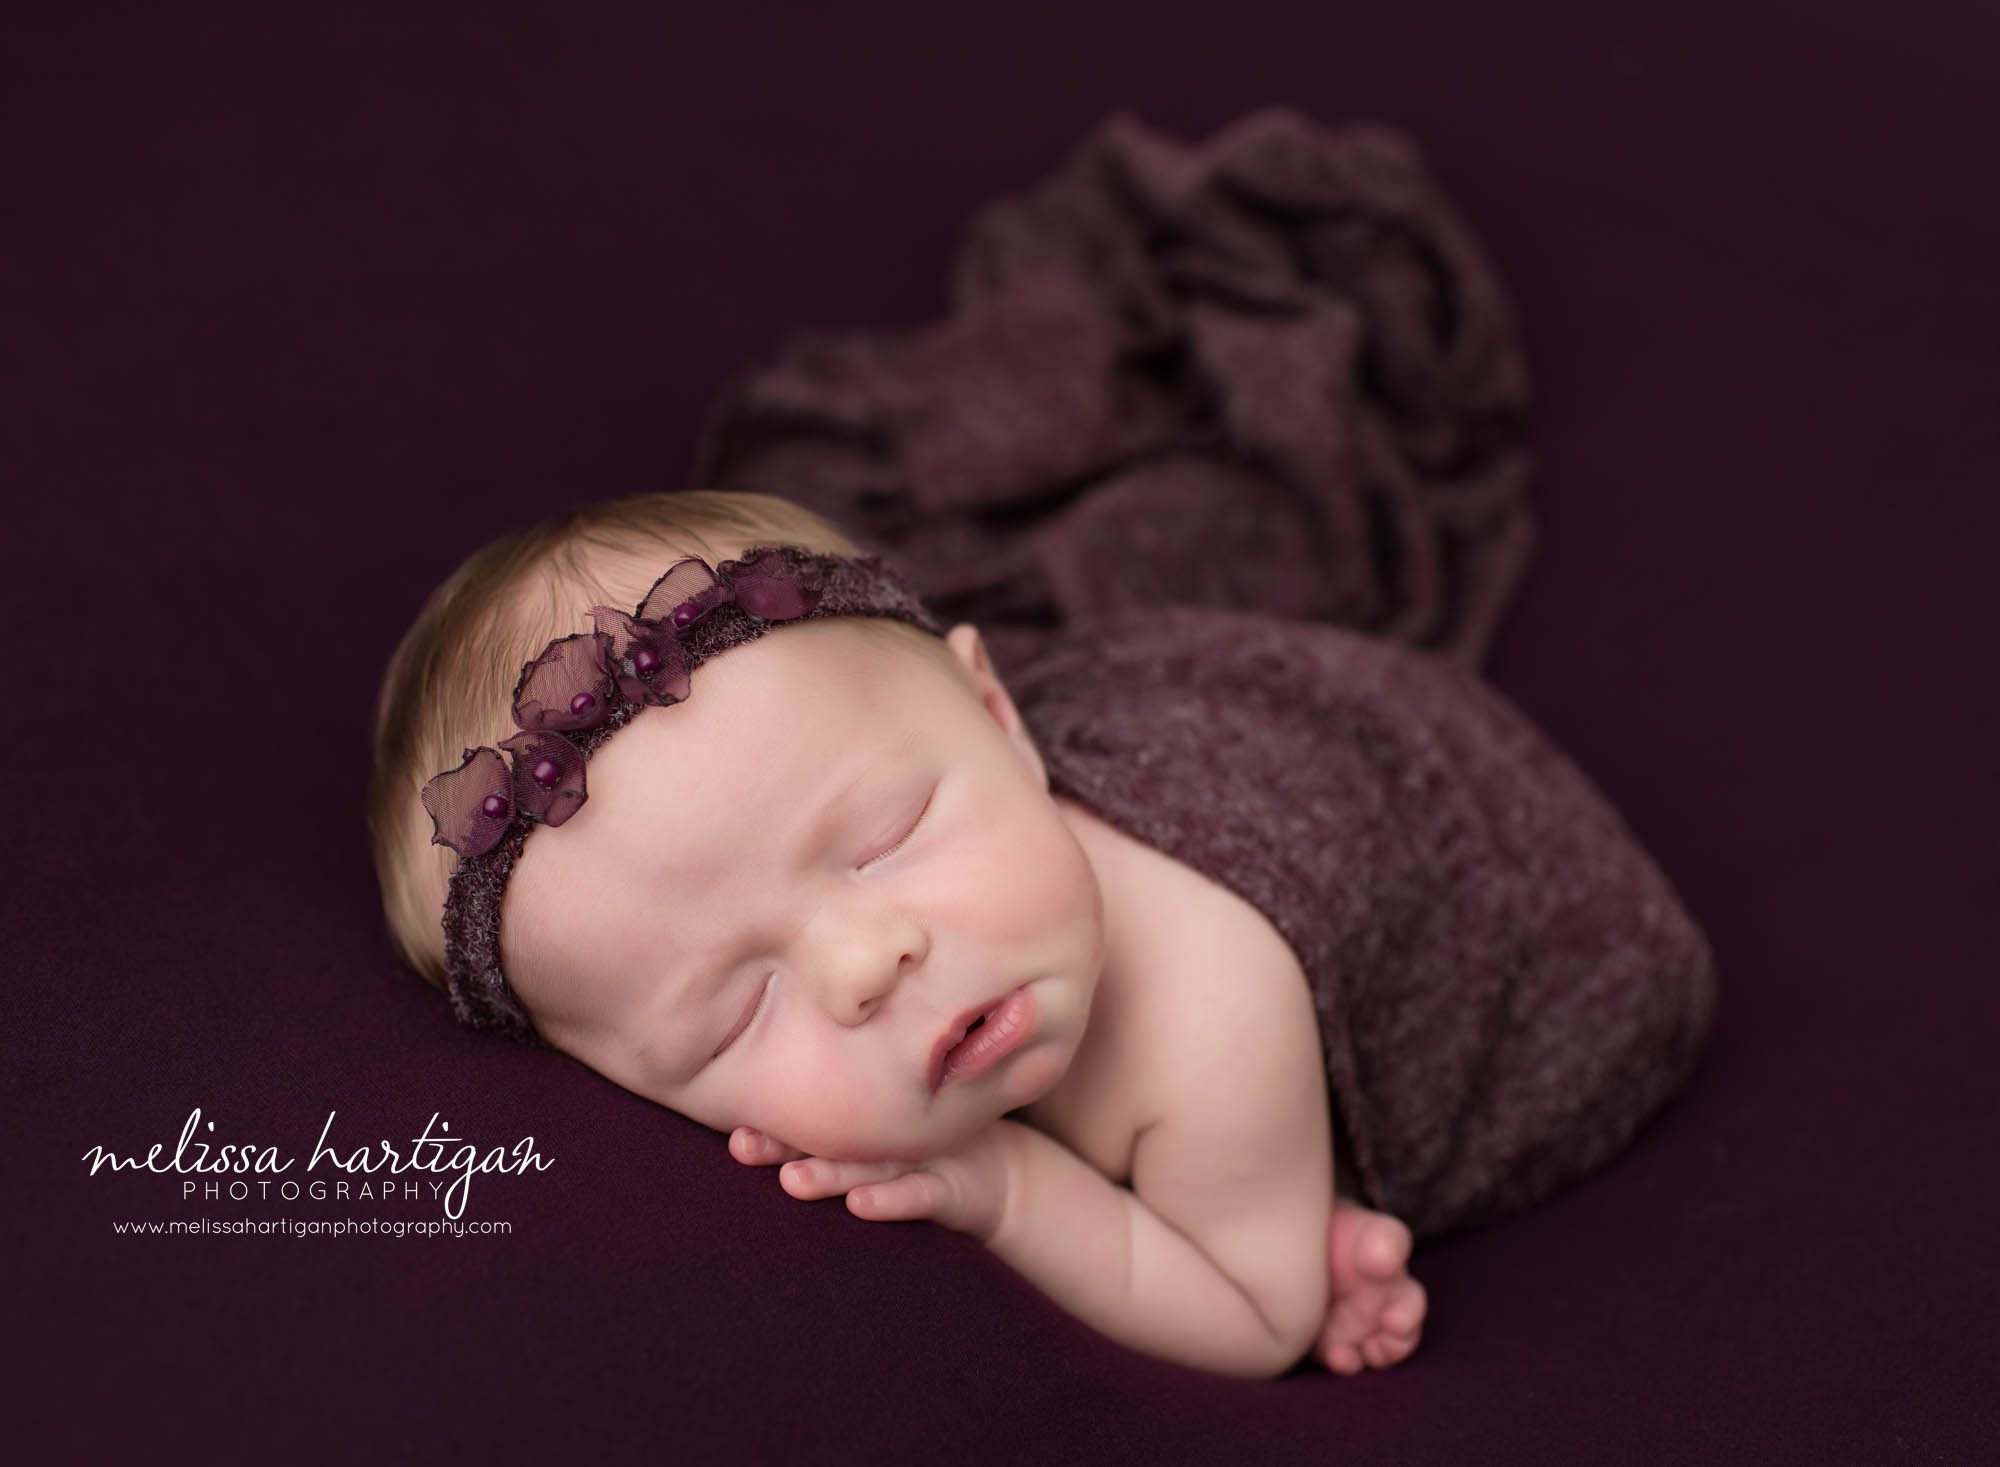 newborn baby girl posed on eggplant purple backdrop with headband and wrap draped over